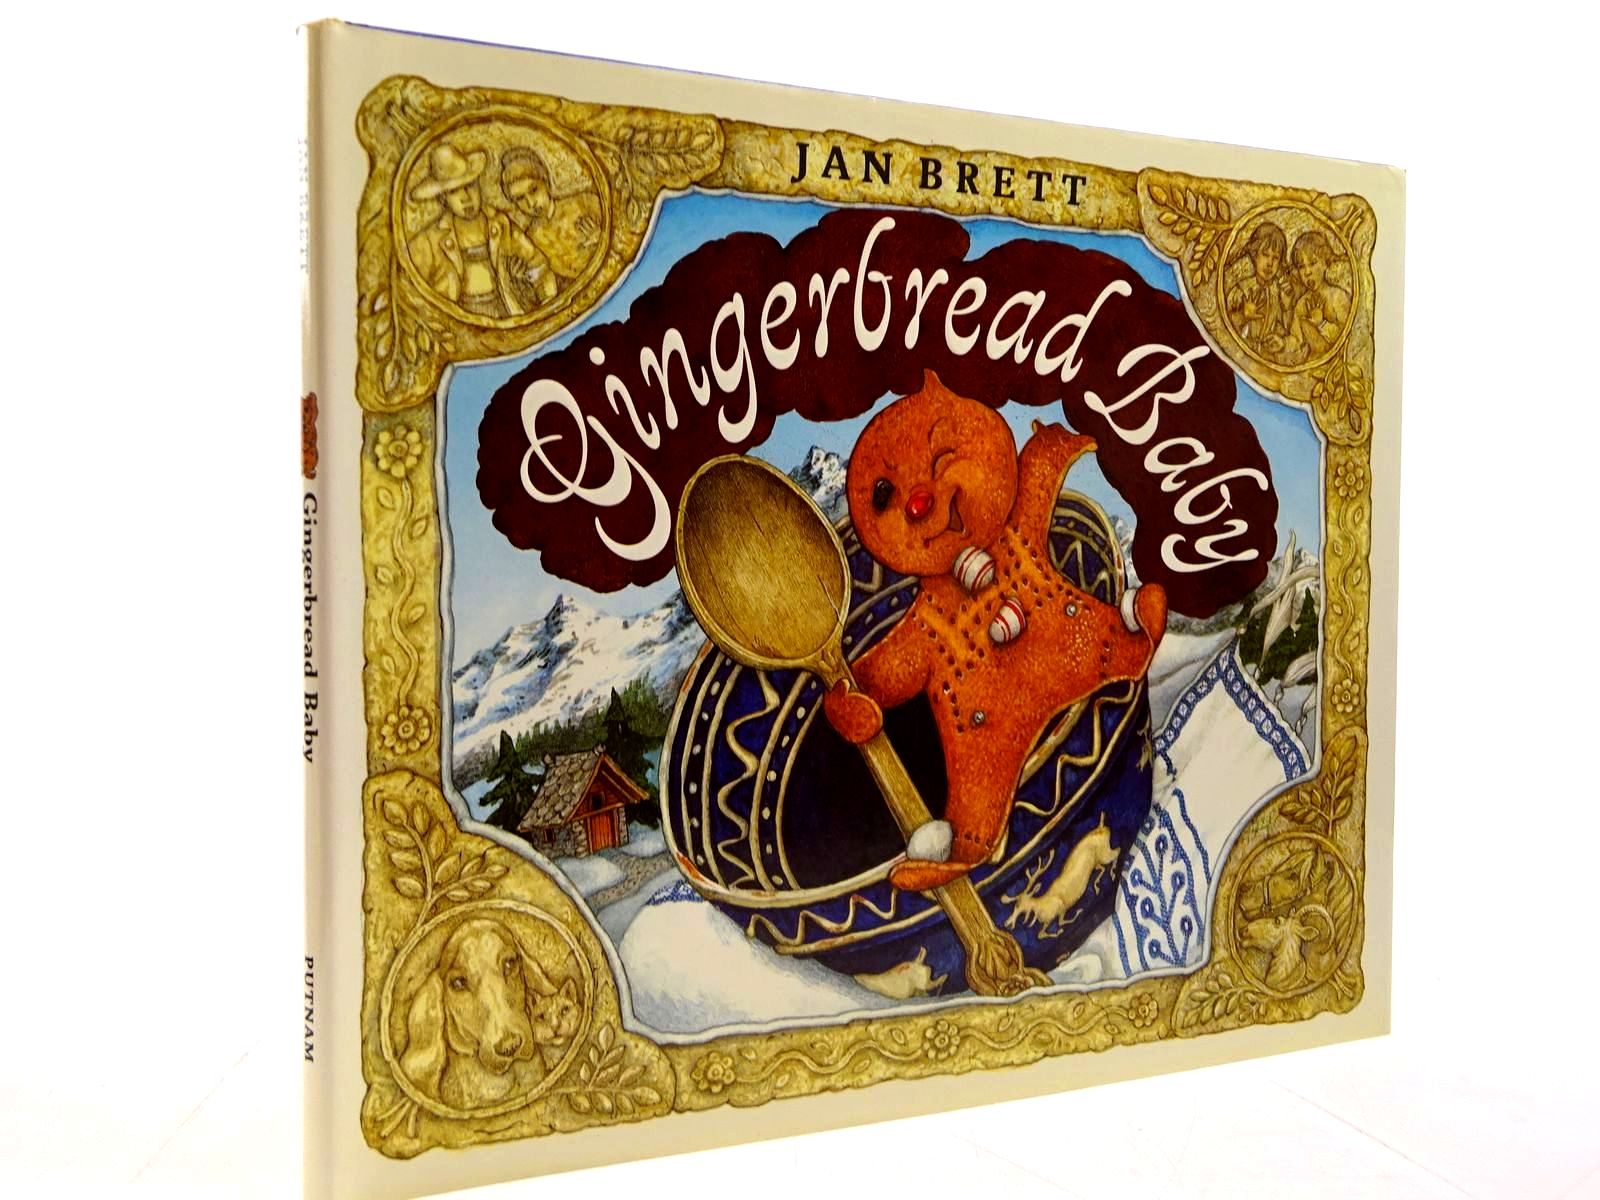 Photo of GINGERBREAD BABY written by Brett, Jan illustrated by Brett, Jan published by G.P. Putnam's Sons (STOCK CODE: 2130735)  for sale by Stella & Rose's Books